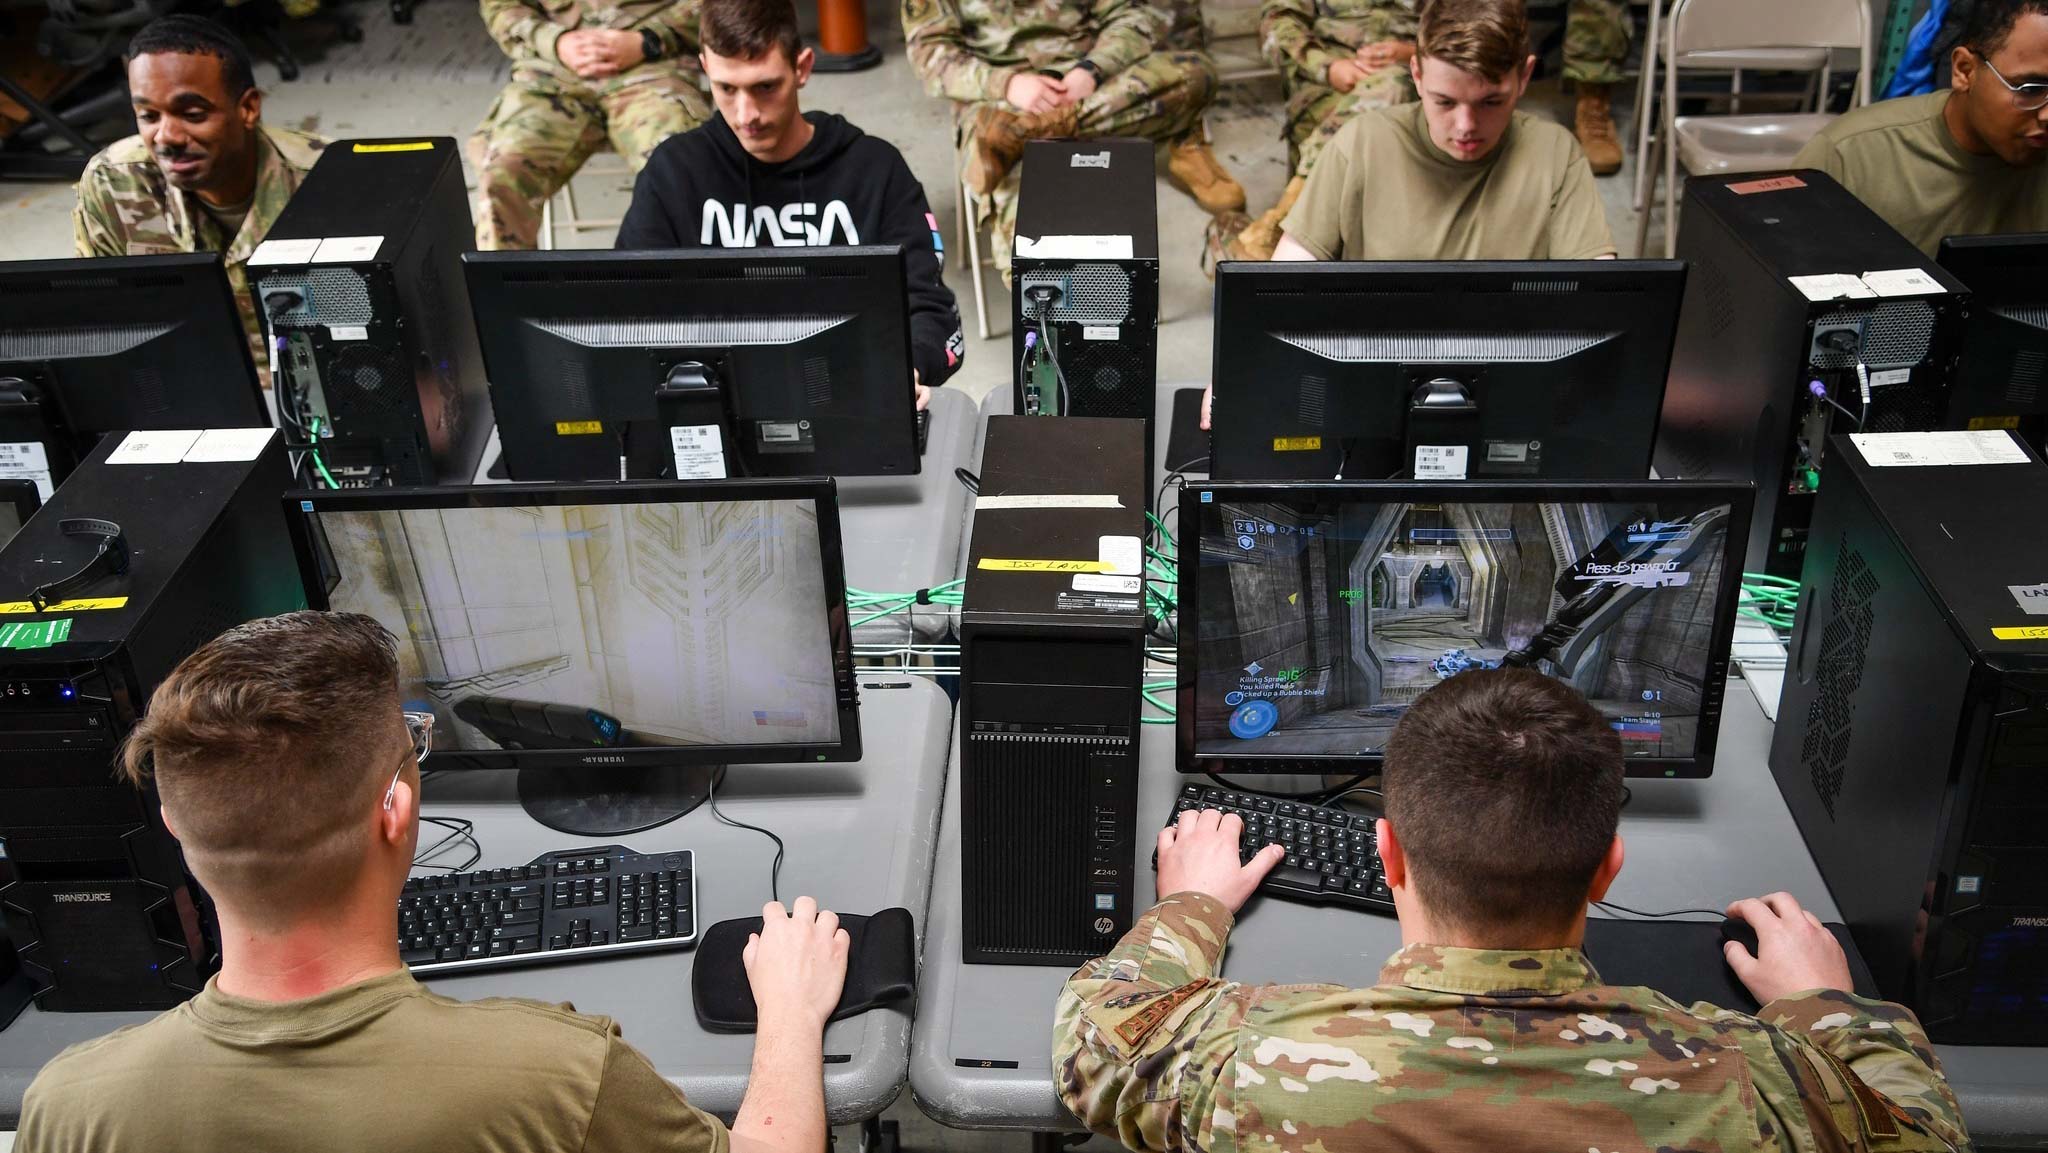 Cyber Airmen compete during Cyber Games at Joint Base Langley-Eustis, May 26, 2022. (Image: Department of Defense)